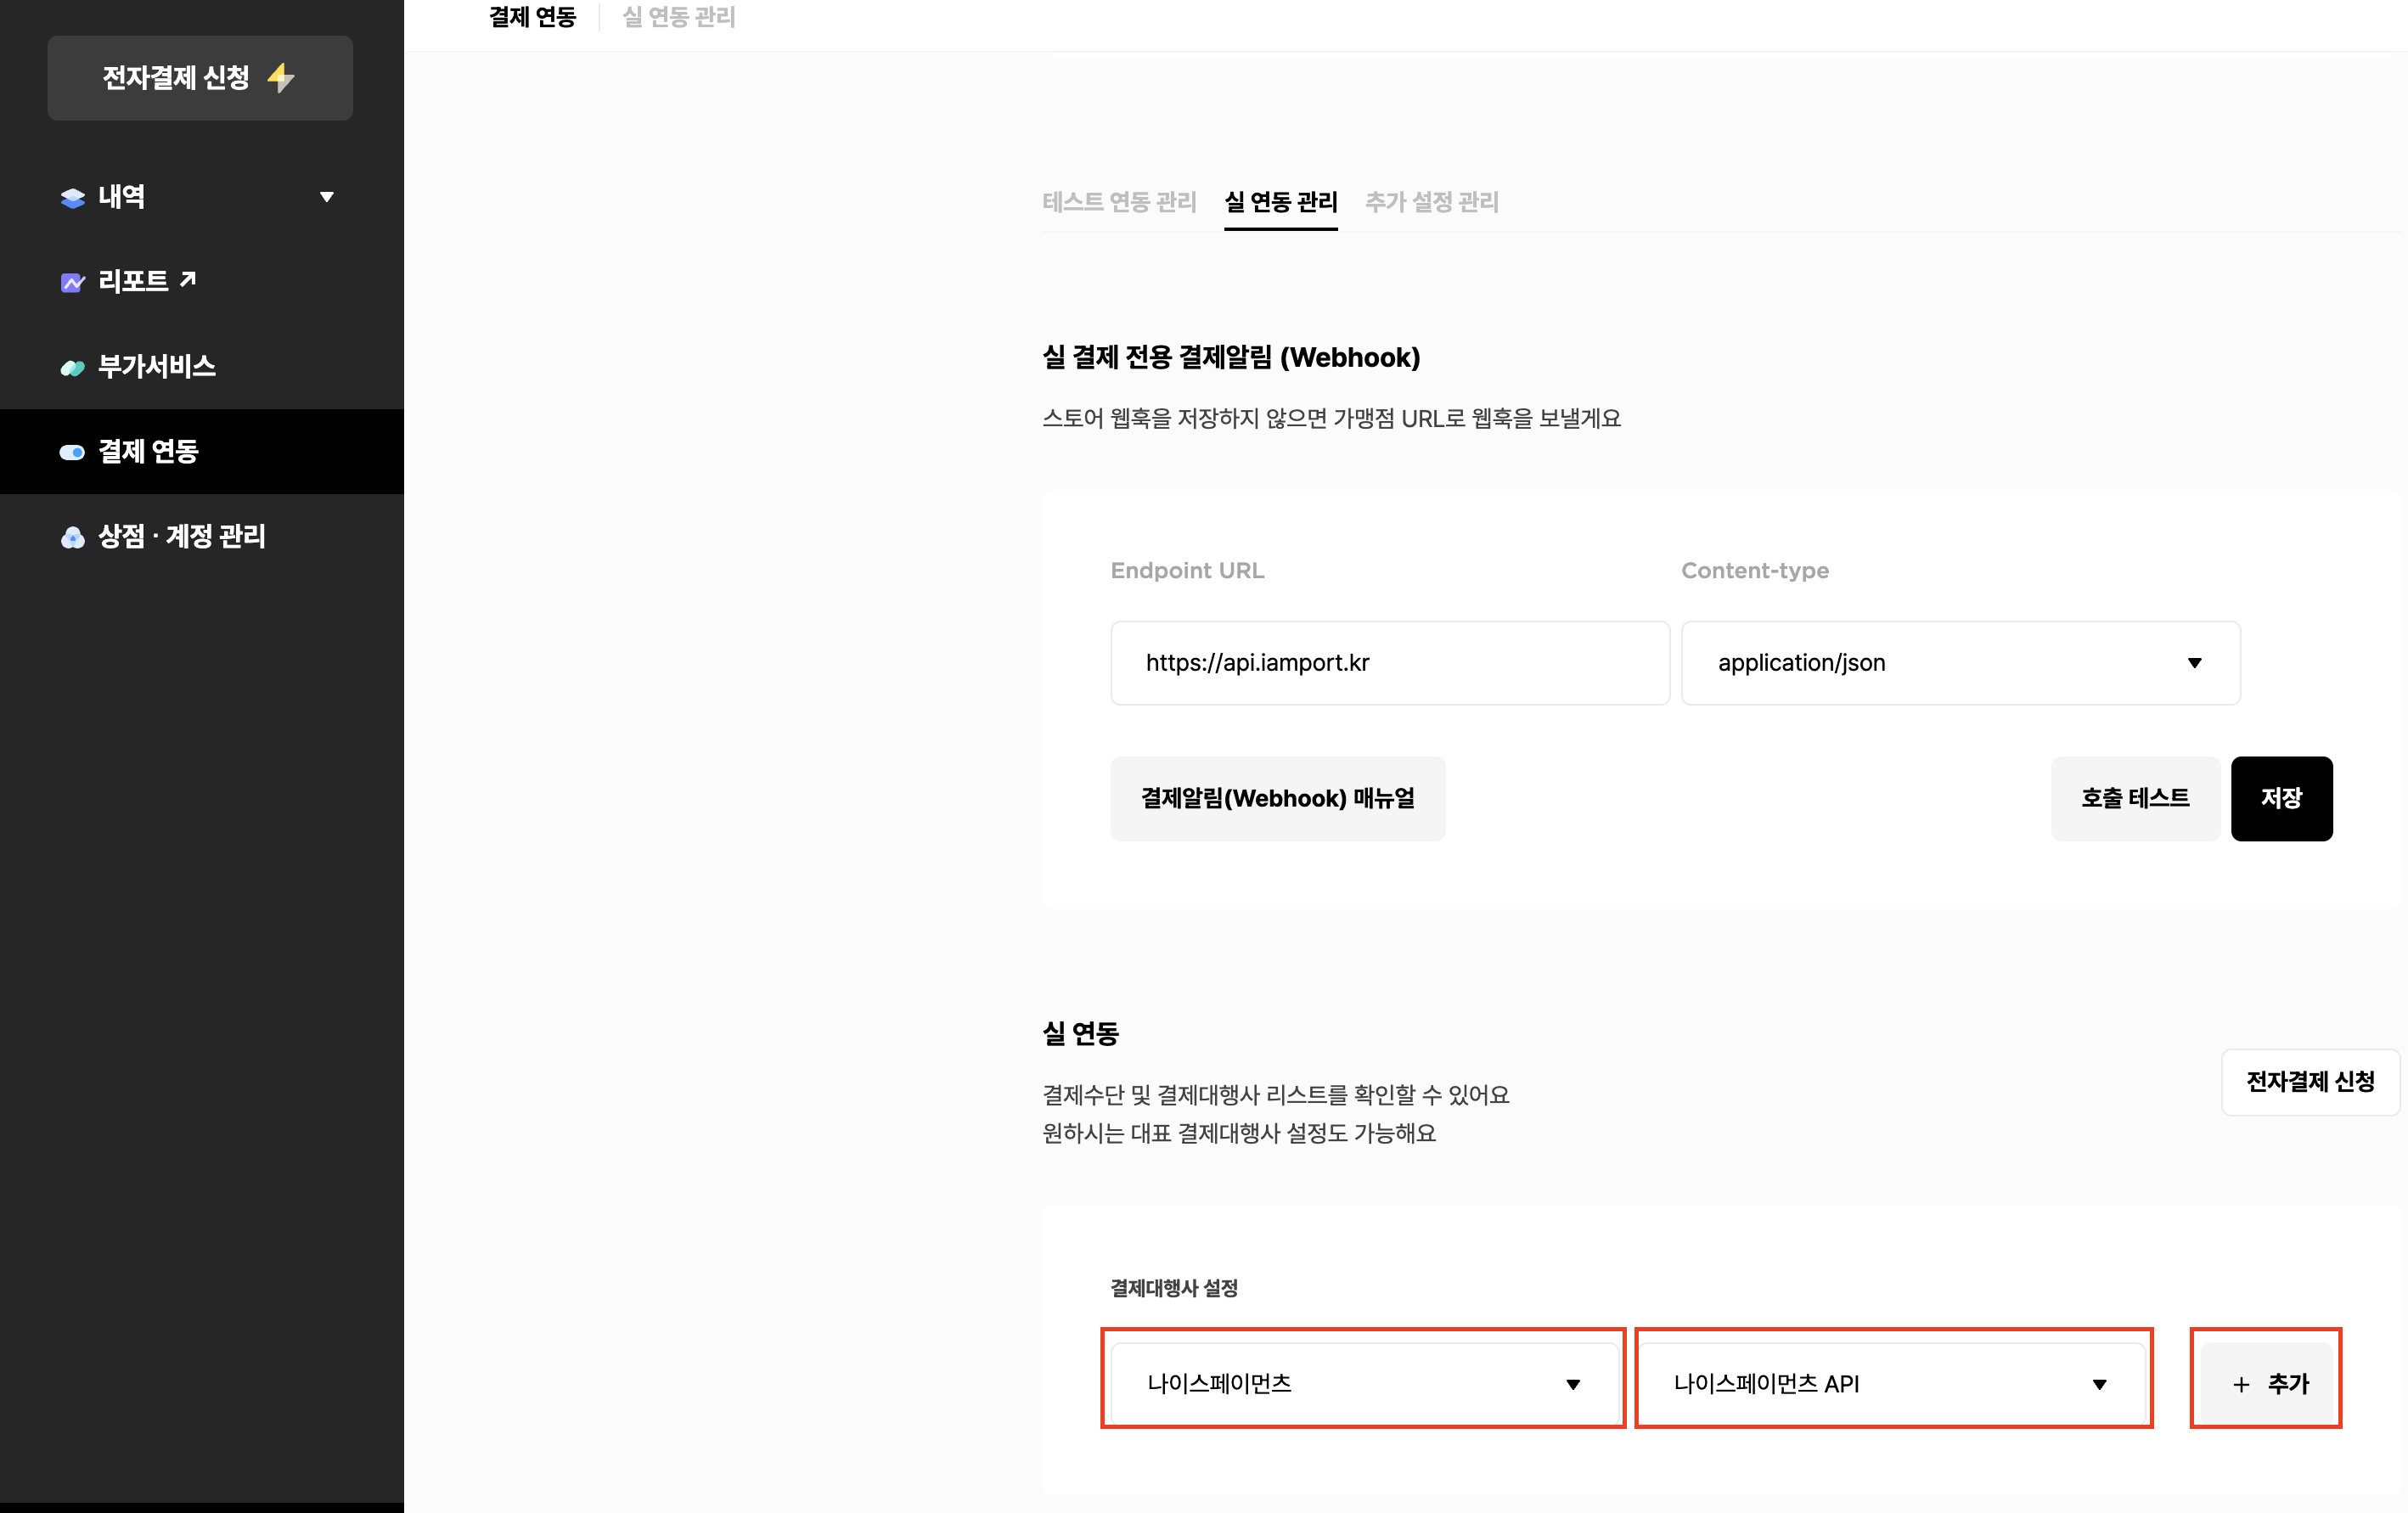 Select PG (NICE Payments) → NICE Payments API -> Add 